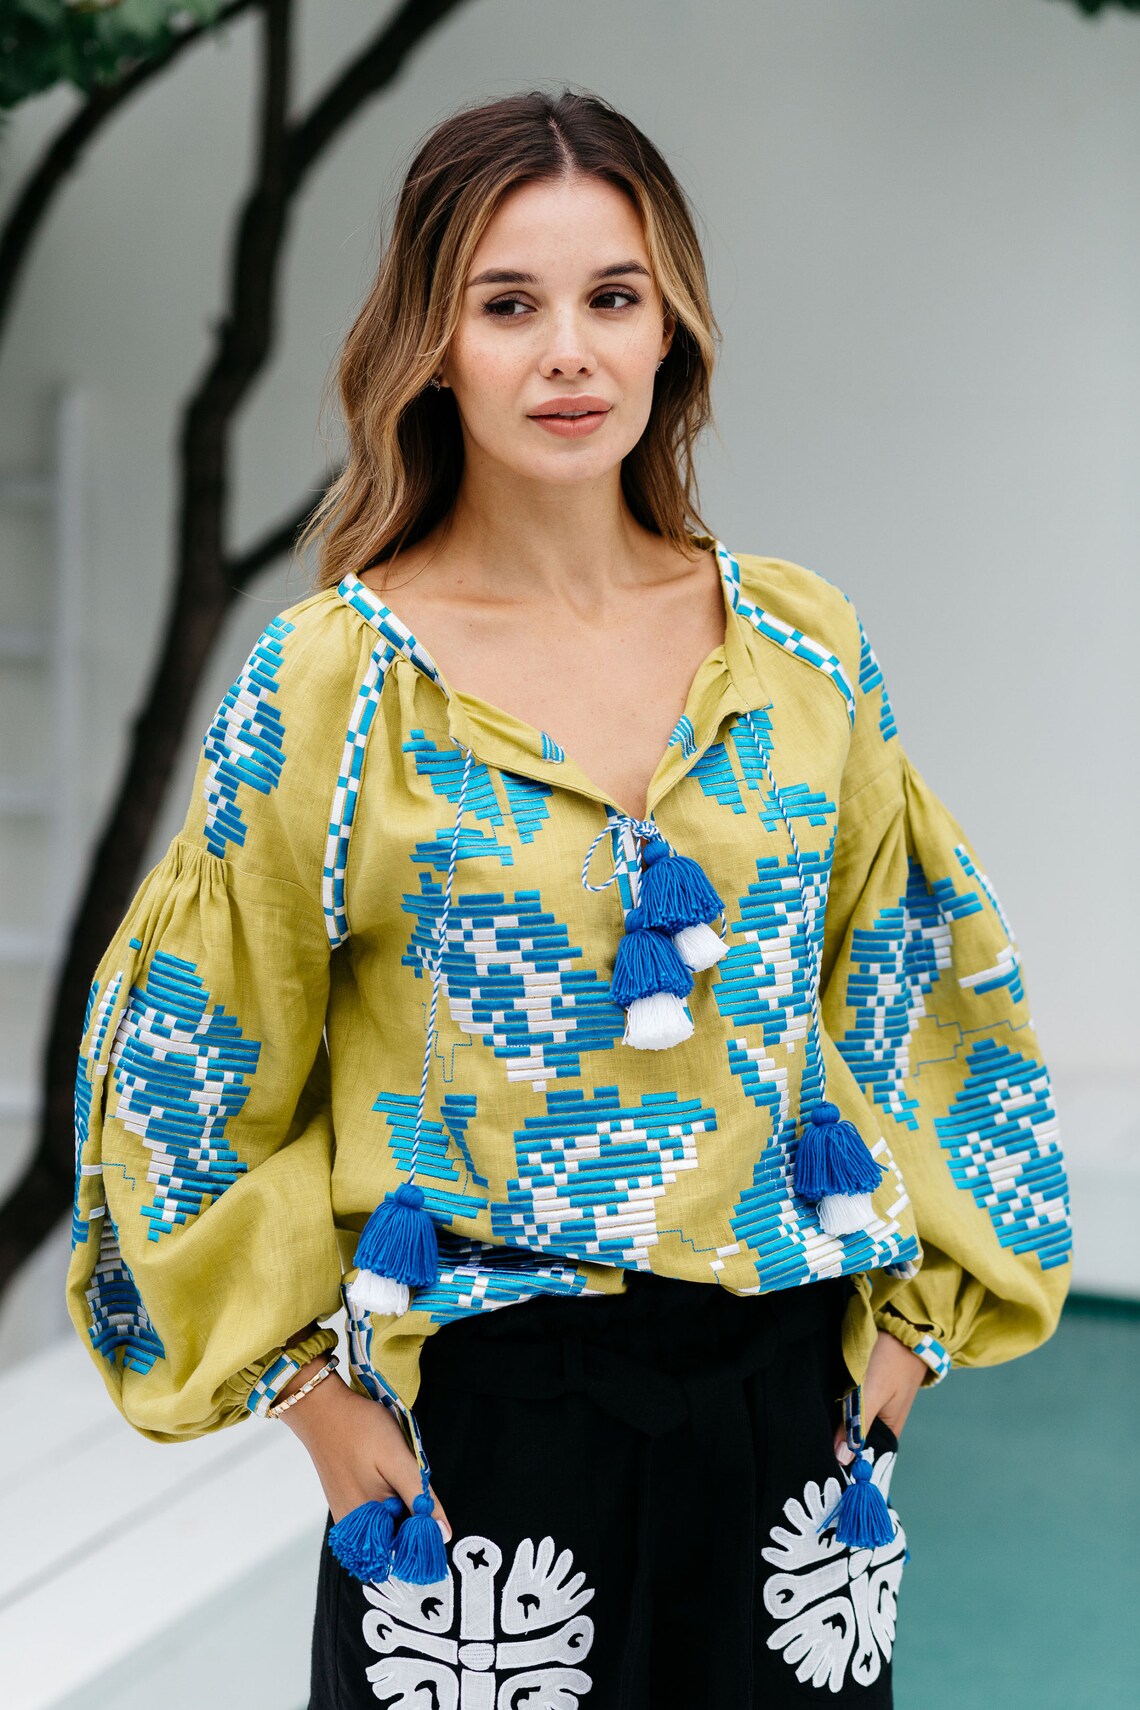 Floral boho blouse with Ukrainian embroidery Vyshyvanka Embroidered bohemian peasant blouse Olive linen loose top